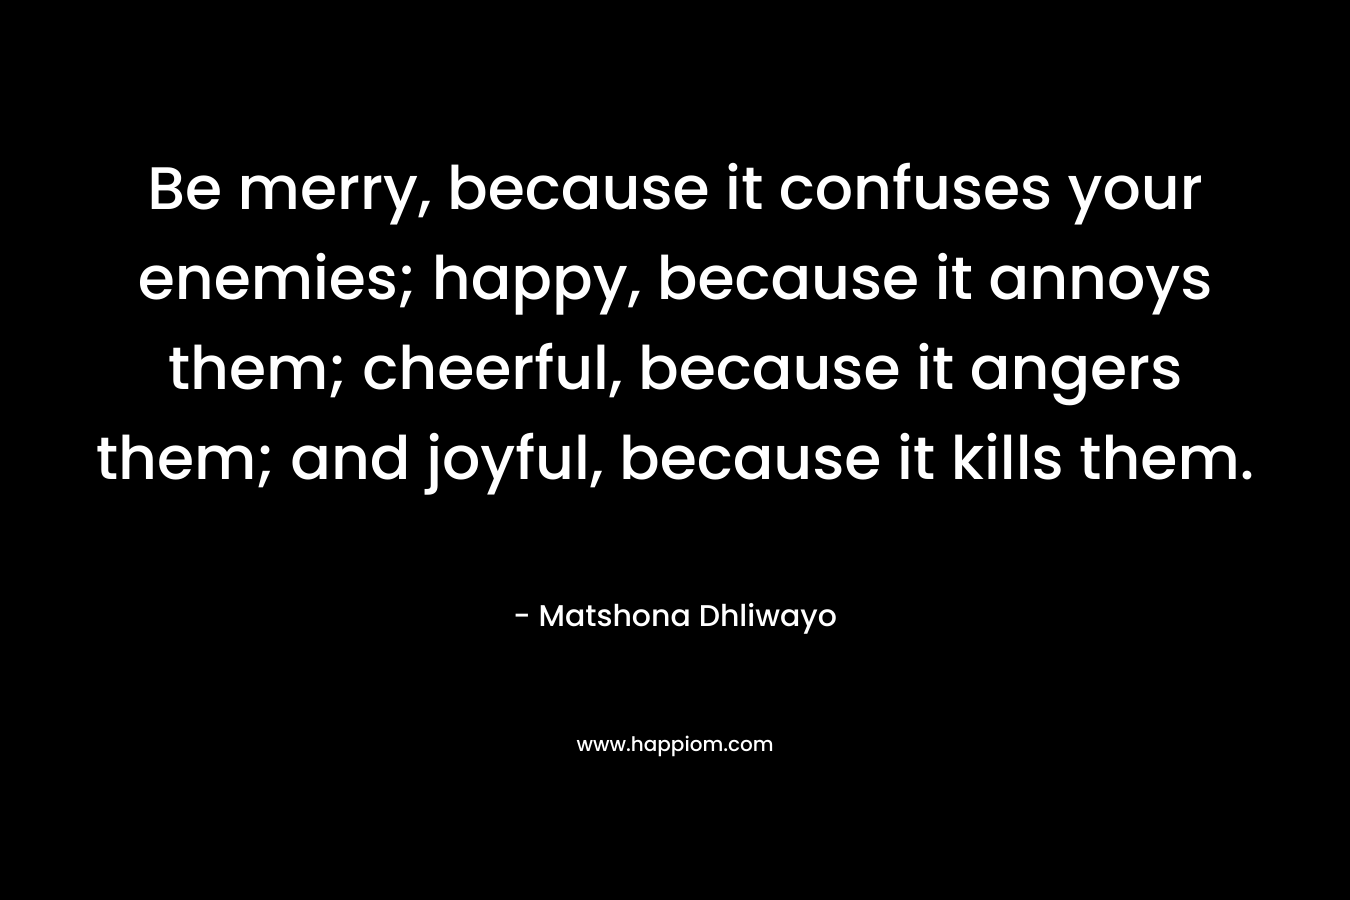 Be merry, because it confuses your enemies; happy, because it annoys them; cheerful, because it angers them; and joyful, because it kills them.